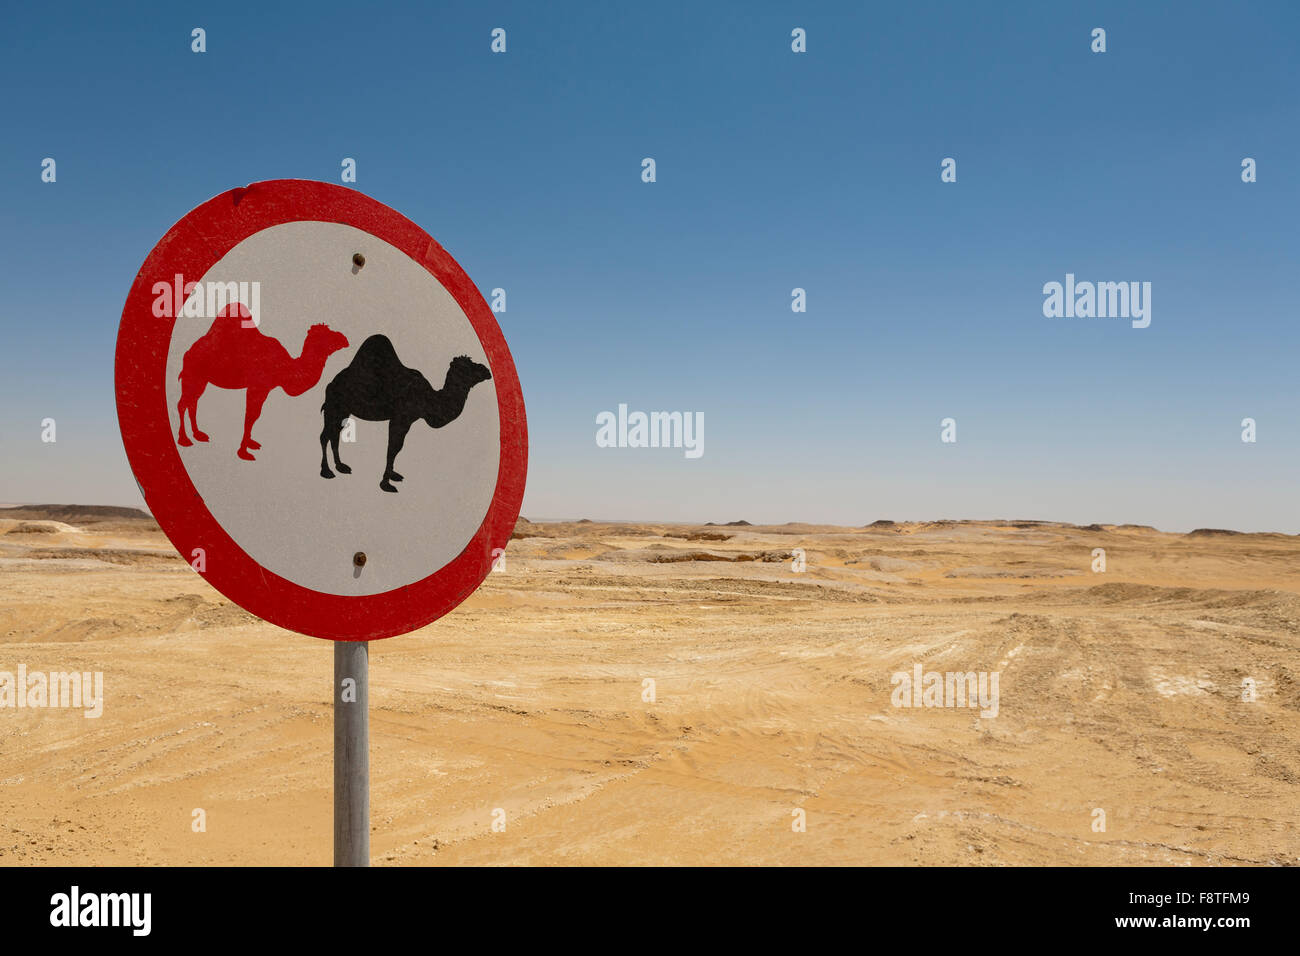 A circular road sign in the desert indicating no overtaking with camels Stock Photo